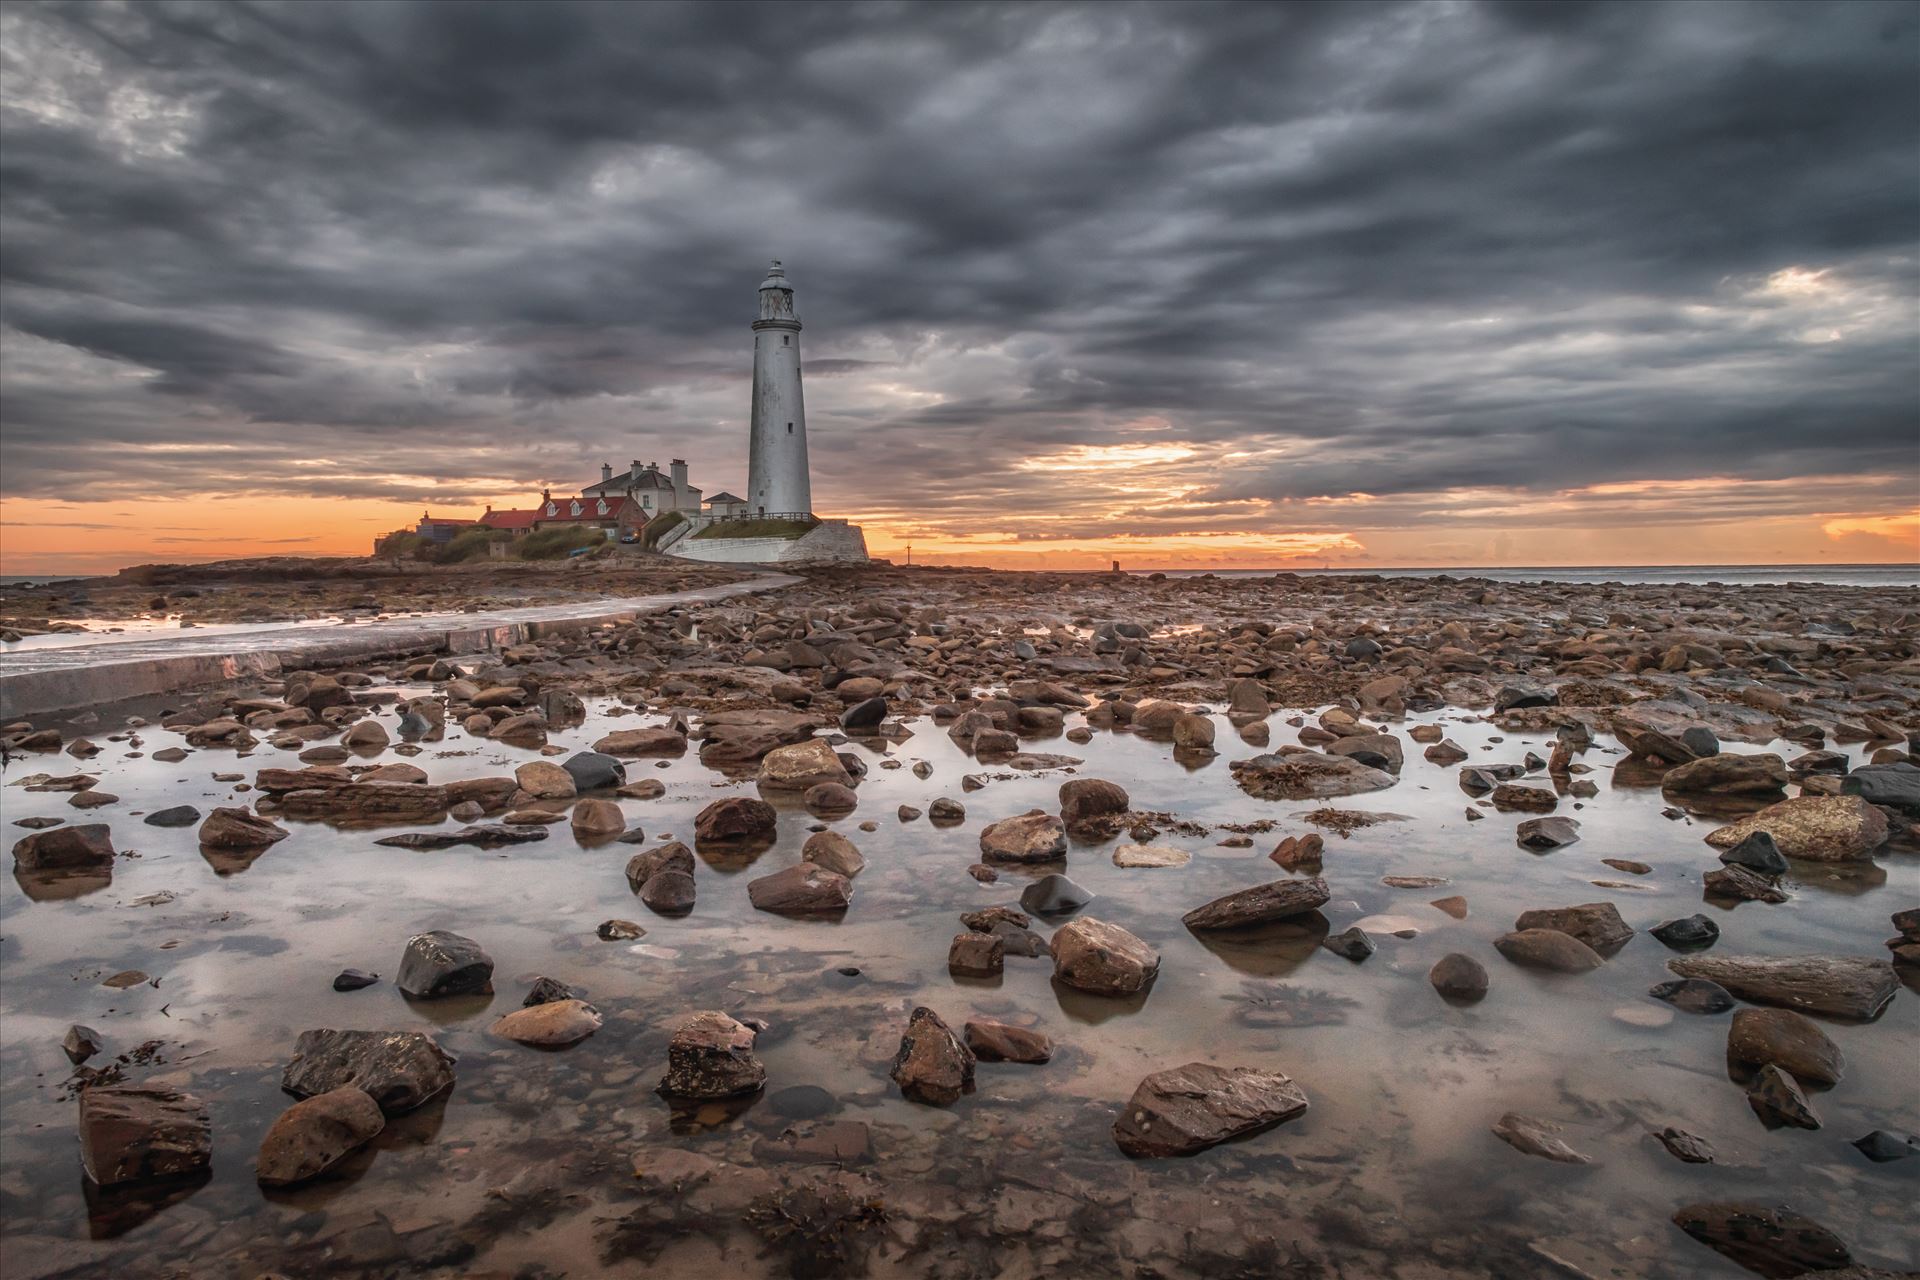 St Mary`s Lighthouse & islandSt Mary`s lighthouse stands on a small rocky tidal island is linked to the mainland by a short concrete causeway which is submerged at high tide. The lighthouse was built in 1898 & was decommissioned in 1984, 2 years after becoming automatic.